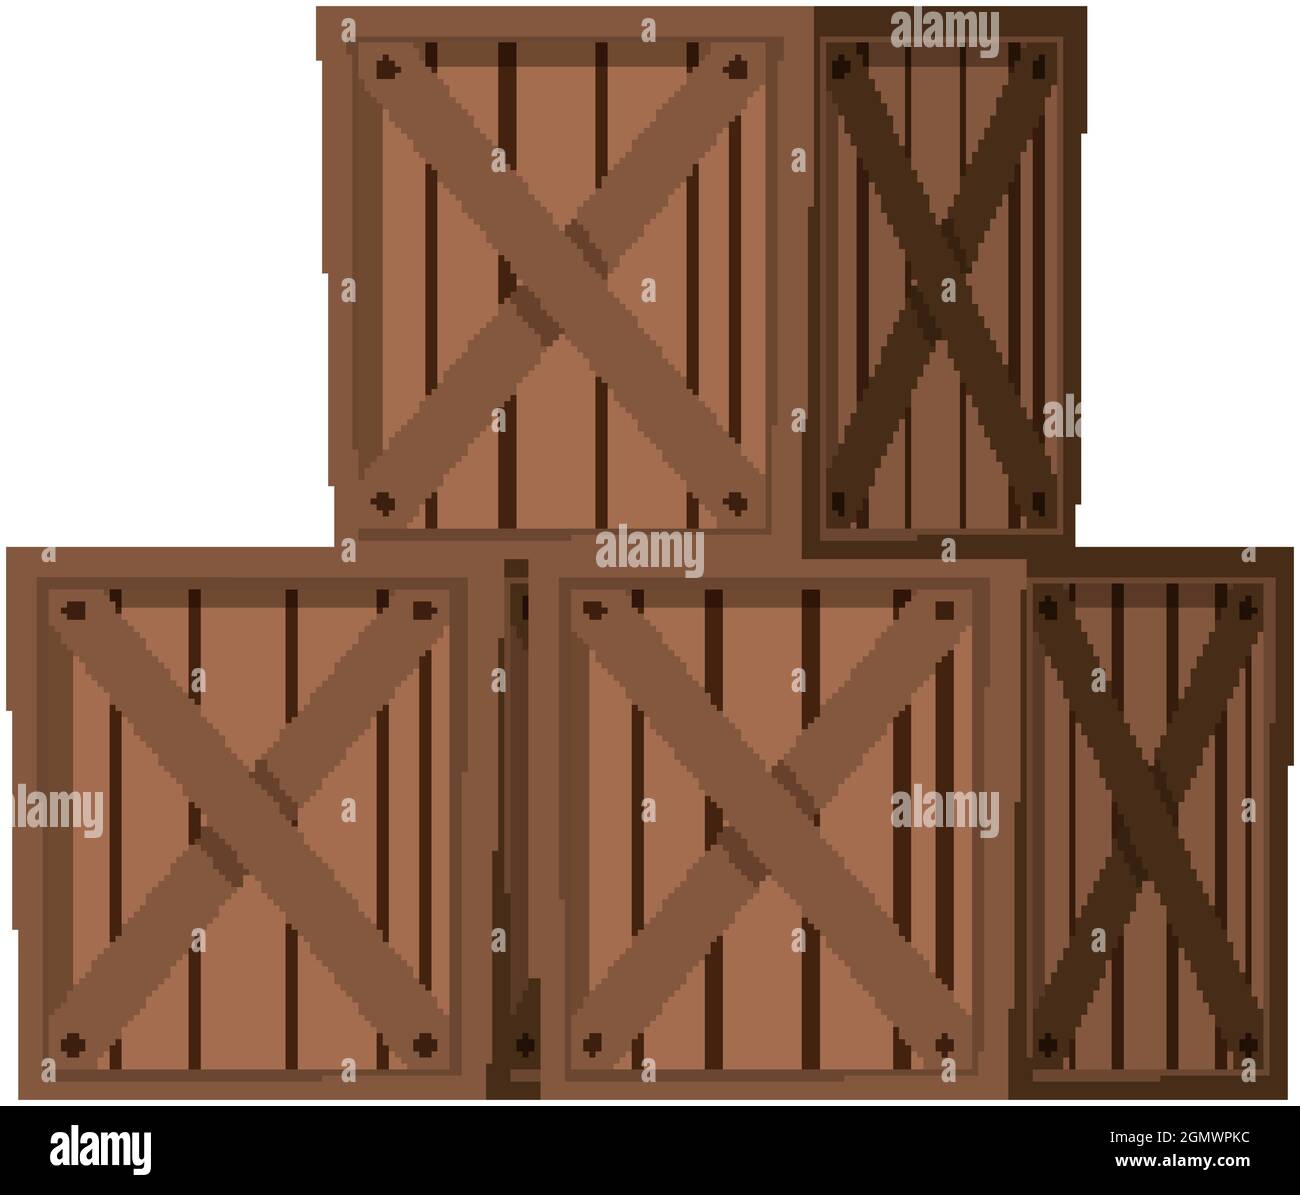 Wooden crate boxs on white background illustration Stock Vector